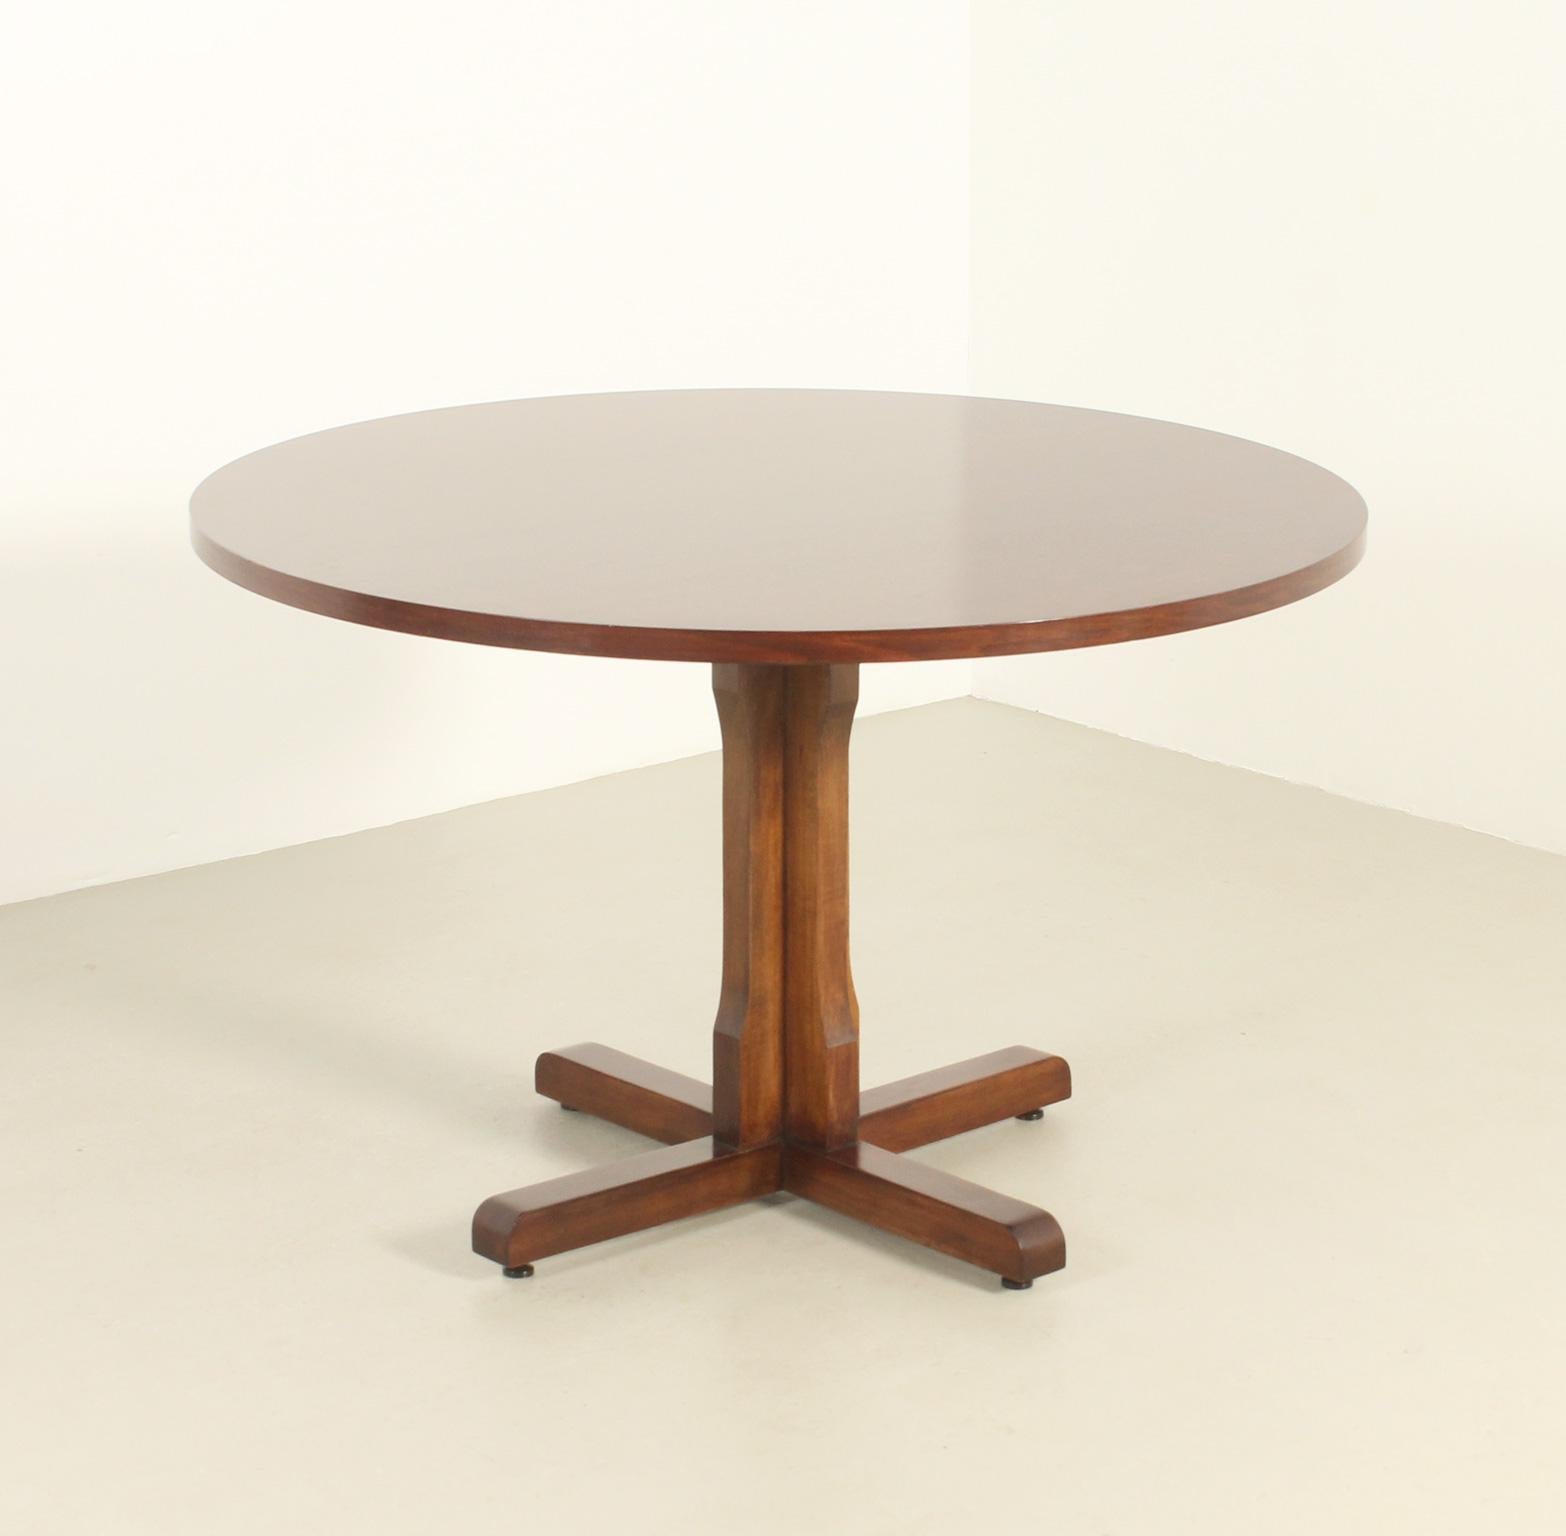 Round dining table designed by Jordi Vilanova, Spain, 1960's. Walnut wood with a wooden base worked with four feet. 